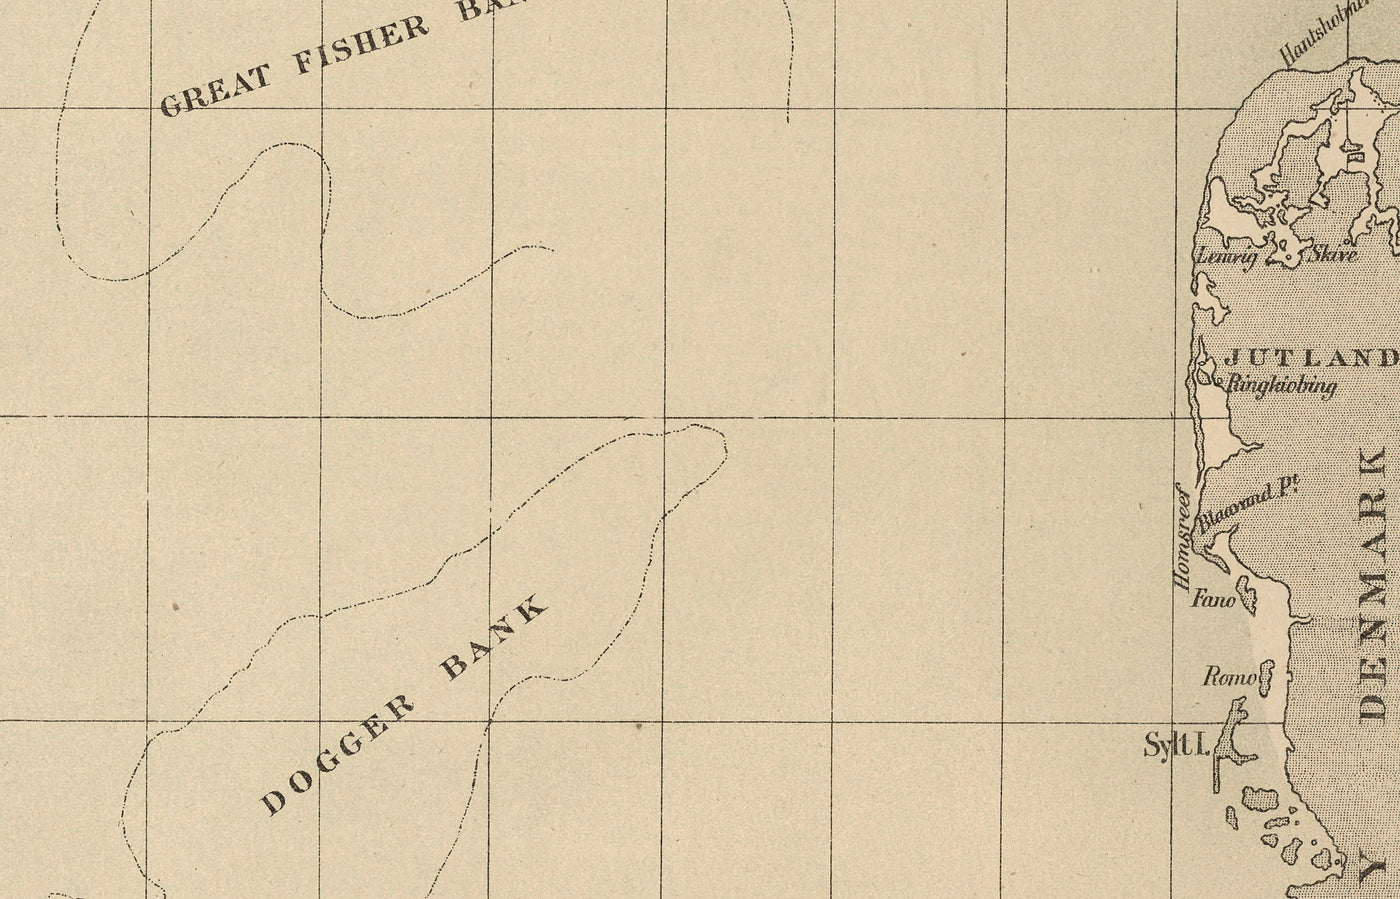 Old Cod Fish Map of the North Sea, 1883 by O.T. Olsen - Cod Fishing, Distribution, Spawning, Etc.